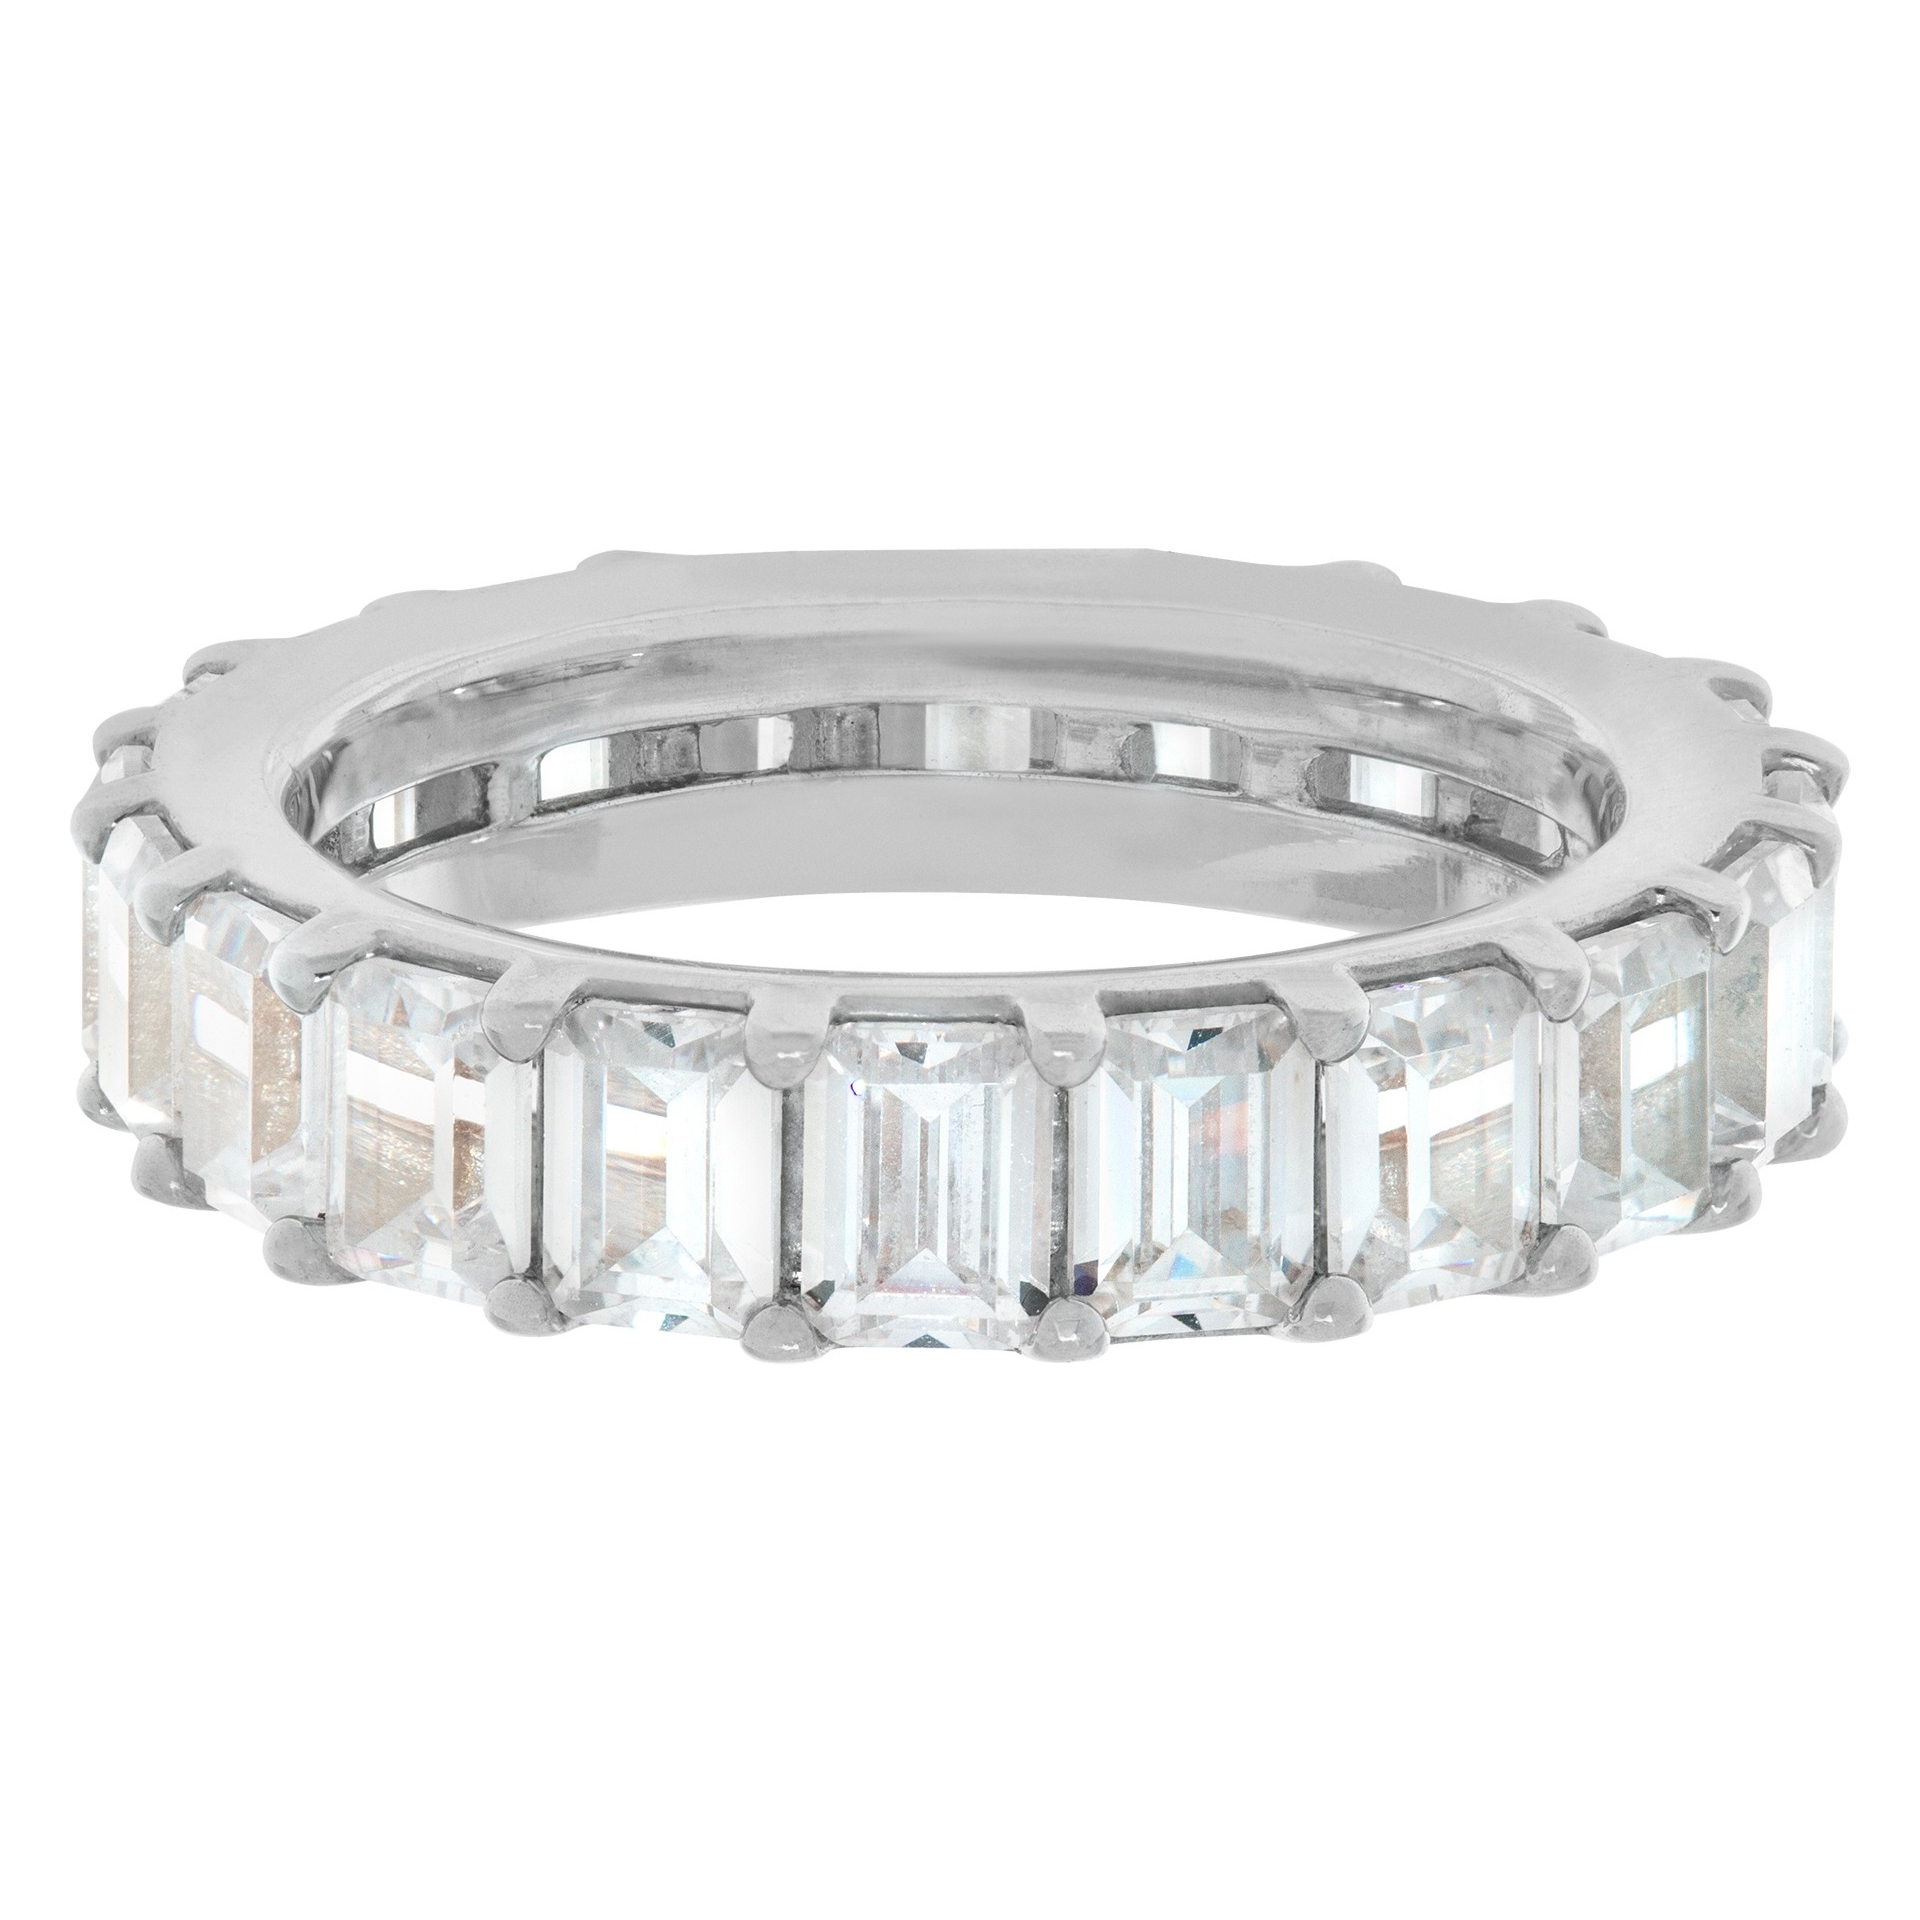 6.0ct Emerald Cut Diamond eternity band and ring image 1